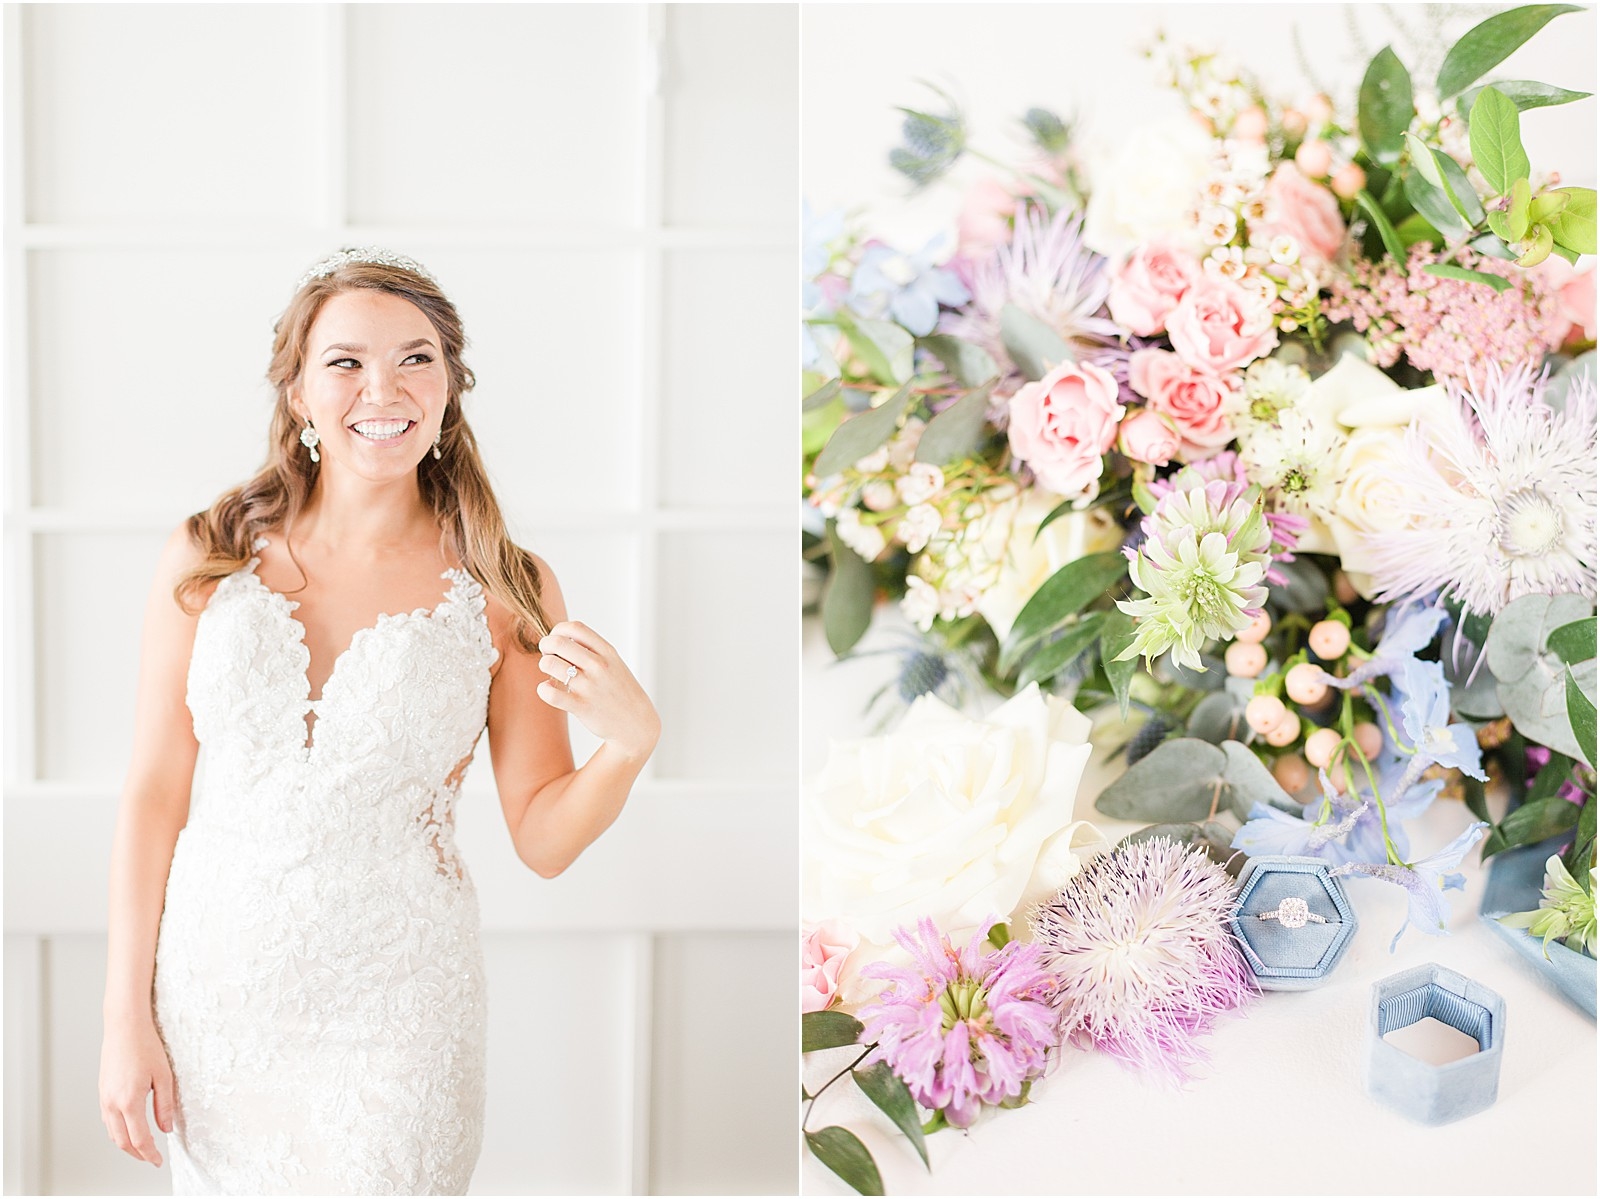 An Evansville County Club Wedding | Abby and Stratton 027.jpg